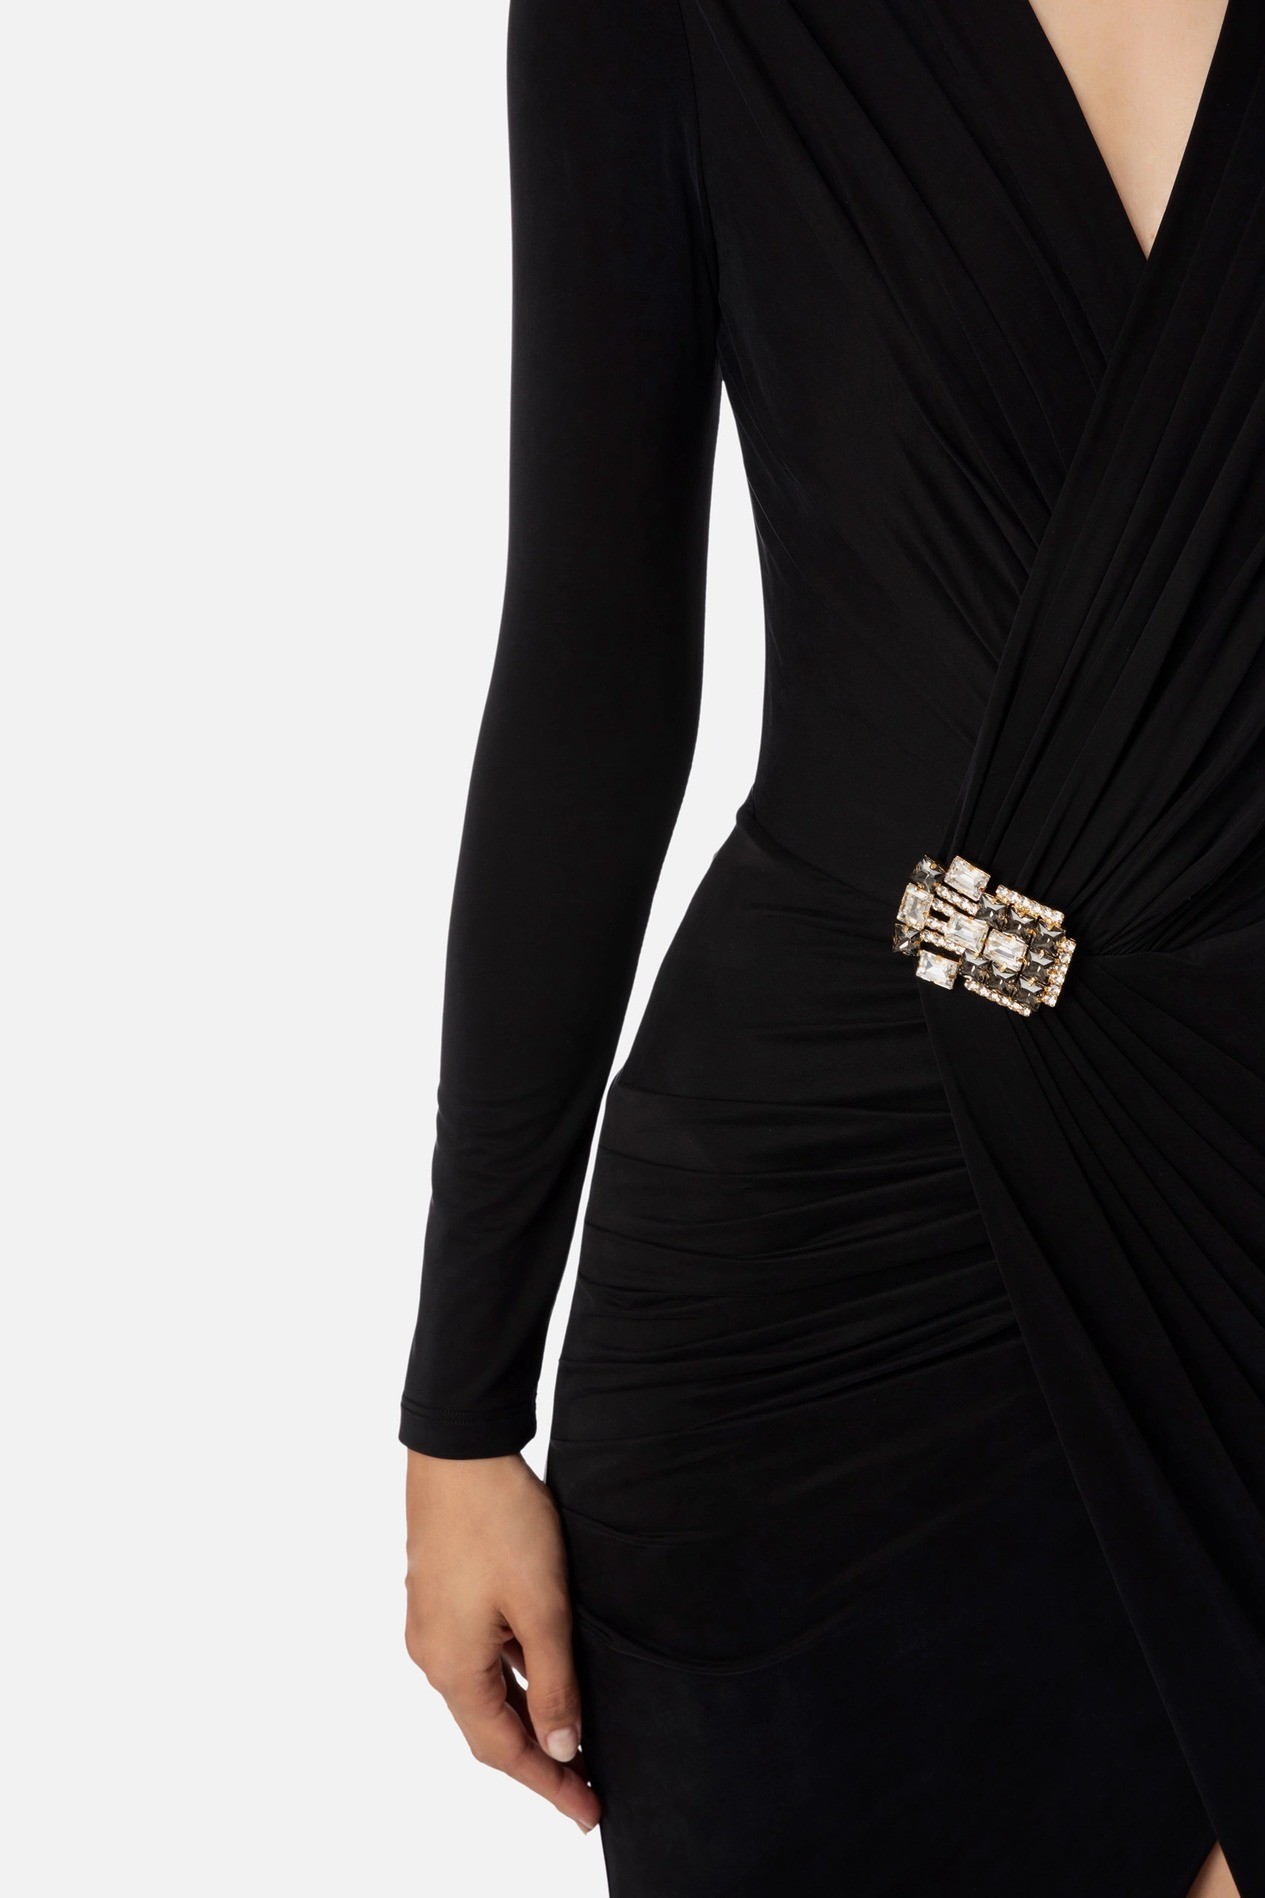 Red Carpet dress in cupro jersey with accessory - black 